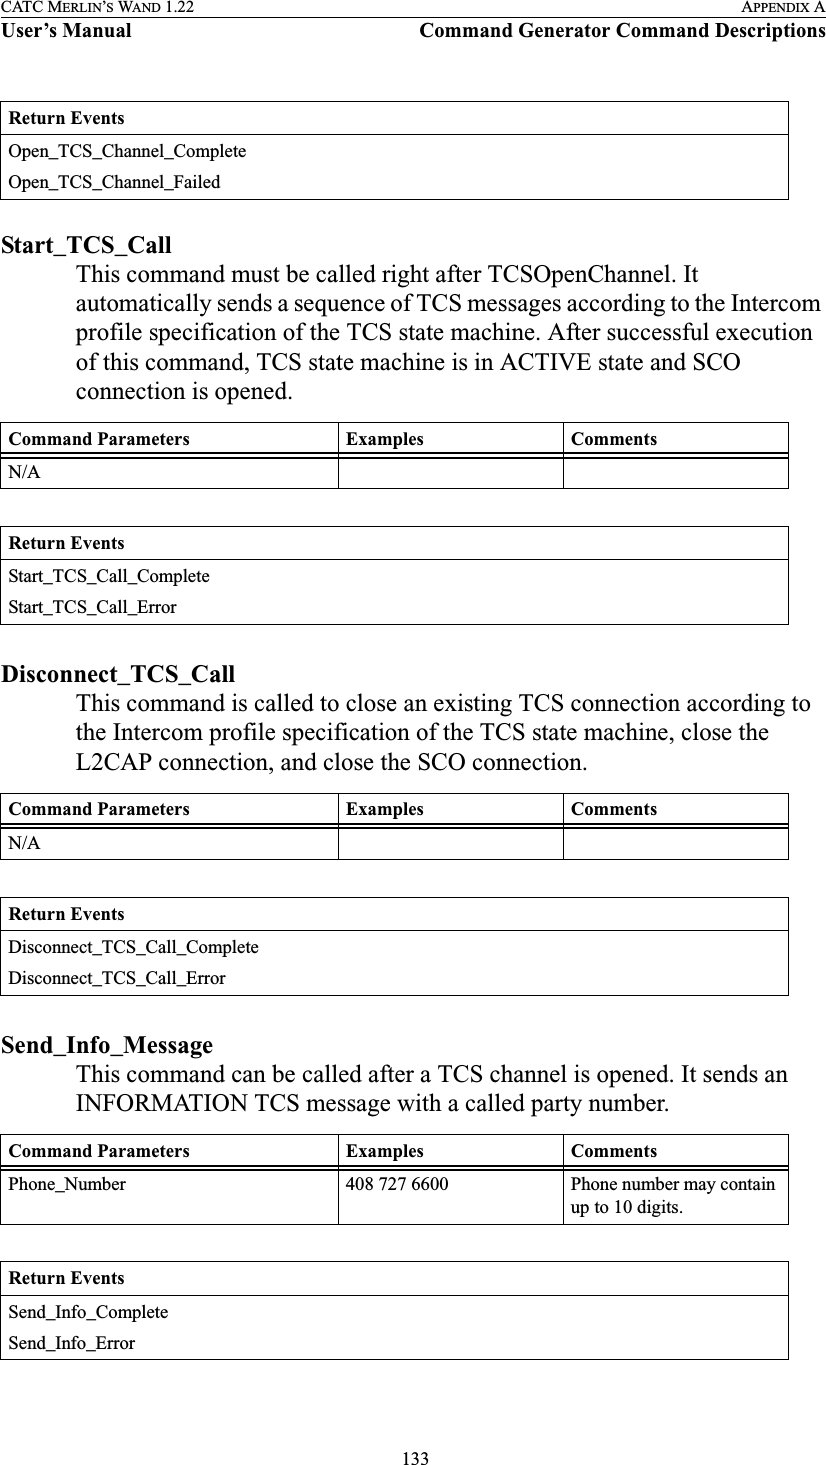  133CATC MERLIN’S WAND 1.22 APPENDIX AUser’s Manual Command Generator Command DescriptionsStart_TCS_CallThis command must be called right after TCSOpenChannel. It automatically sends a sequence of TCS messages according to the Intercom profile specification of the TCS state machine. After successful execution of this command, TCS state machine is in ACTIVE state and SCO connection is opened.  Disconnect_TCS_CallThis command is called to close an existing TCS connection according to the Intercom profile specification of the TCS state machine, close the L2CAP connection, and close the SCO connection.  Send_Info_MessageThis command can be called after a TCS channel is opened. It sends an INFORMATION TCS message with a called party number.  Return EventsOpen_TCS_Channel_CompleteOpen_TCS_Channel_FailedCommand Parameters Examples CommentsN/AReturn EventsStart_TCS_Call_CompleteStart_TCS_Call_ErrorCommand Parameters Examples CommentsN/AReturn EventsDisconnect_TCS_Call_CompleteDisconnect_TCS_Call_ErrorCommand Parameters Examples CommentsPhone_Number 408 727 6600 Phone number may contain up to 10 digits.Return EventsSend_Info_CompleteSend_Info_Error